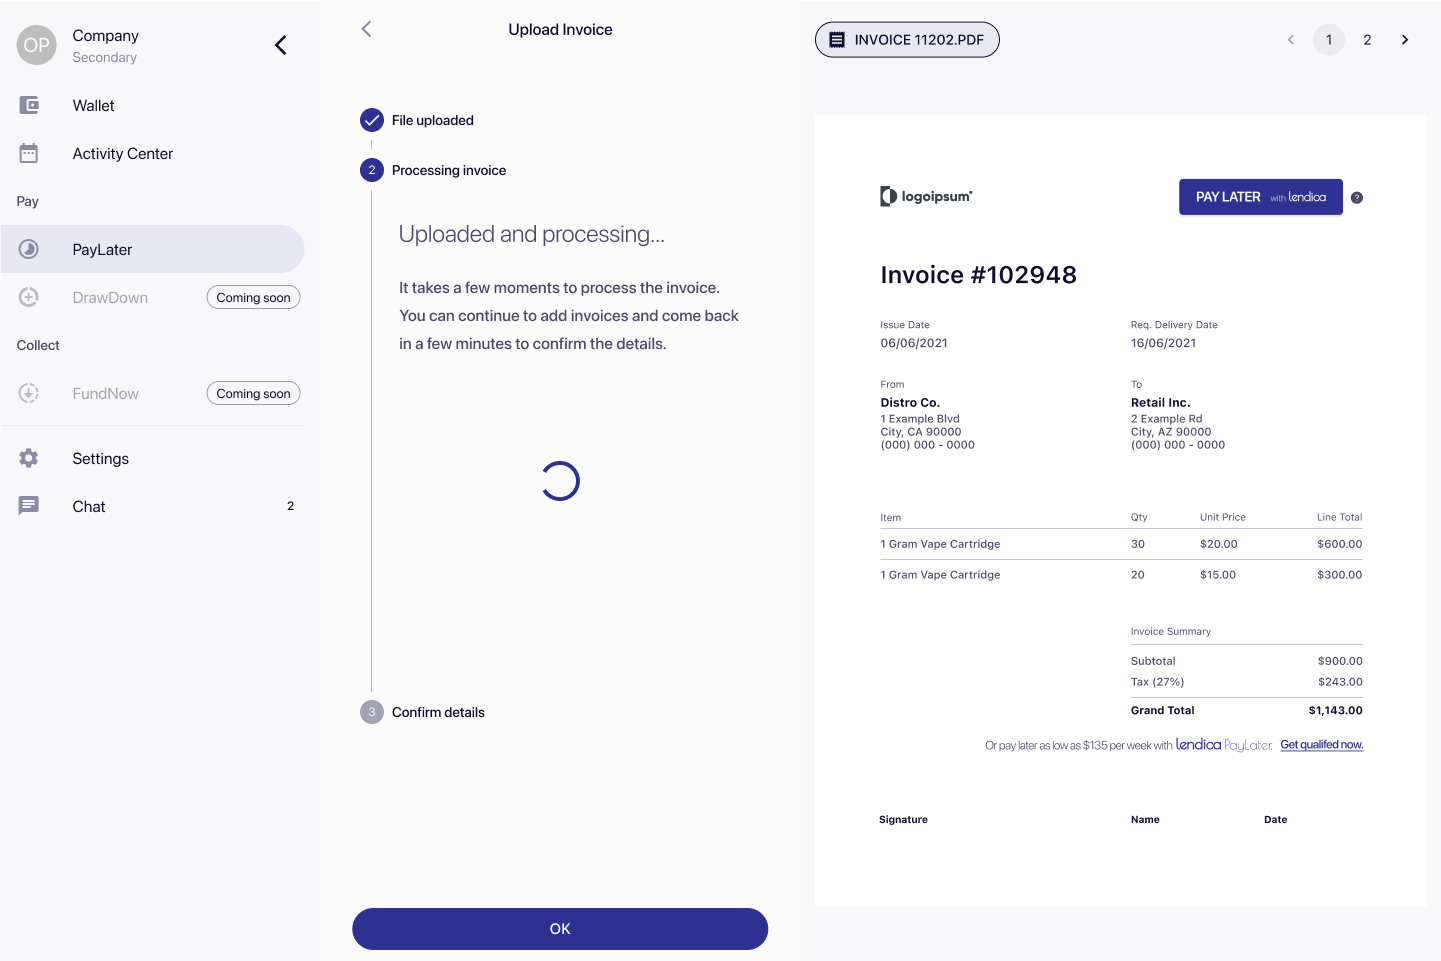 A screenshot of a demo lendica platform - the user is being directed to upload an invoice inside PayLater, and a sample invoice for $1143 of cartridges is show